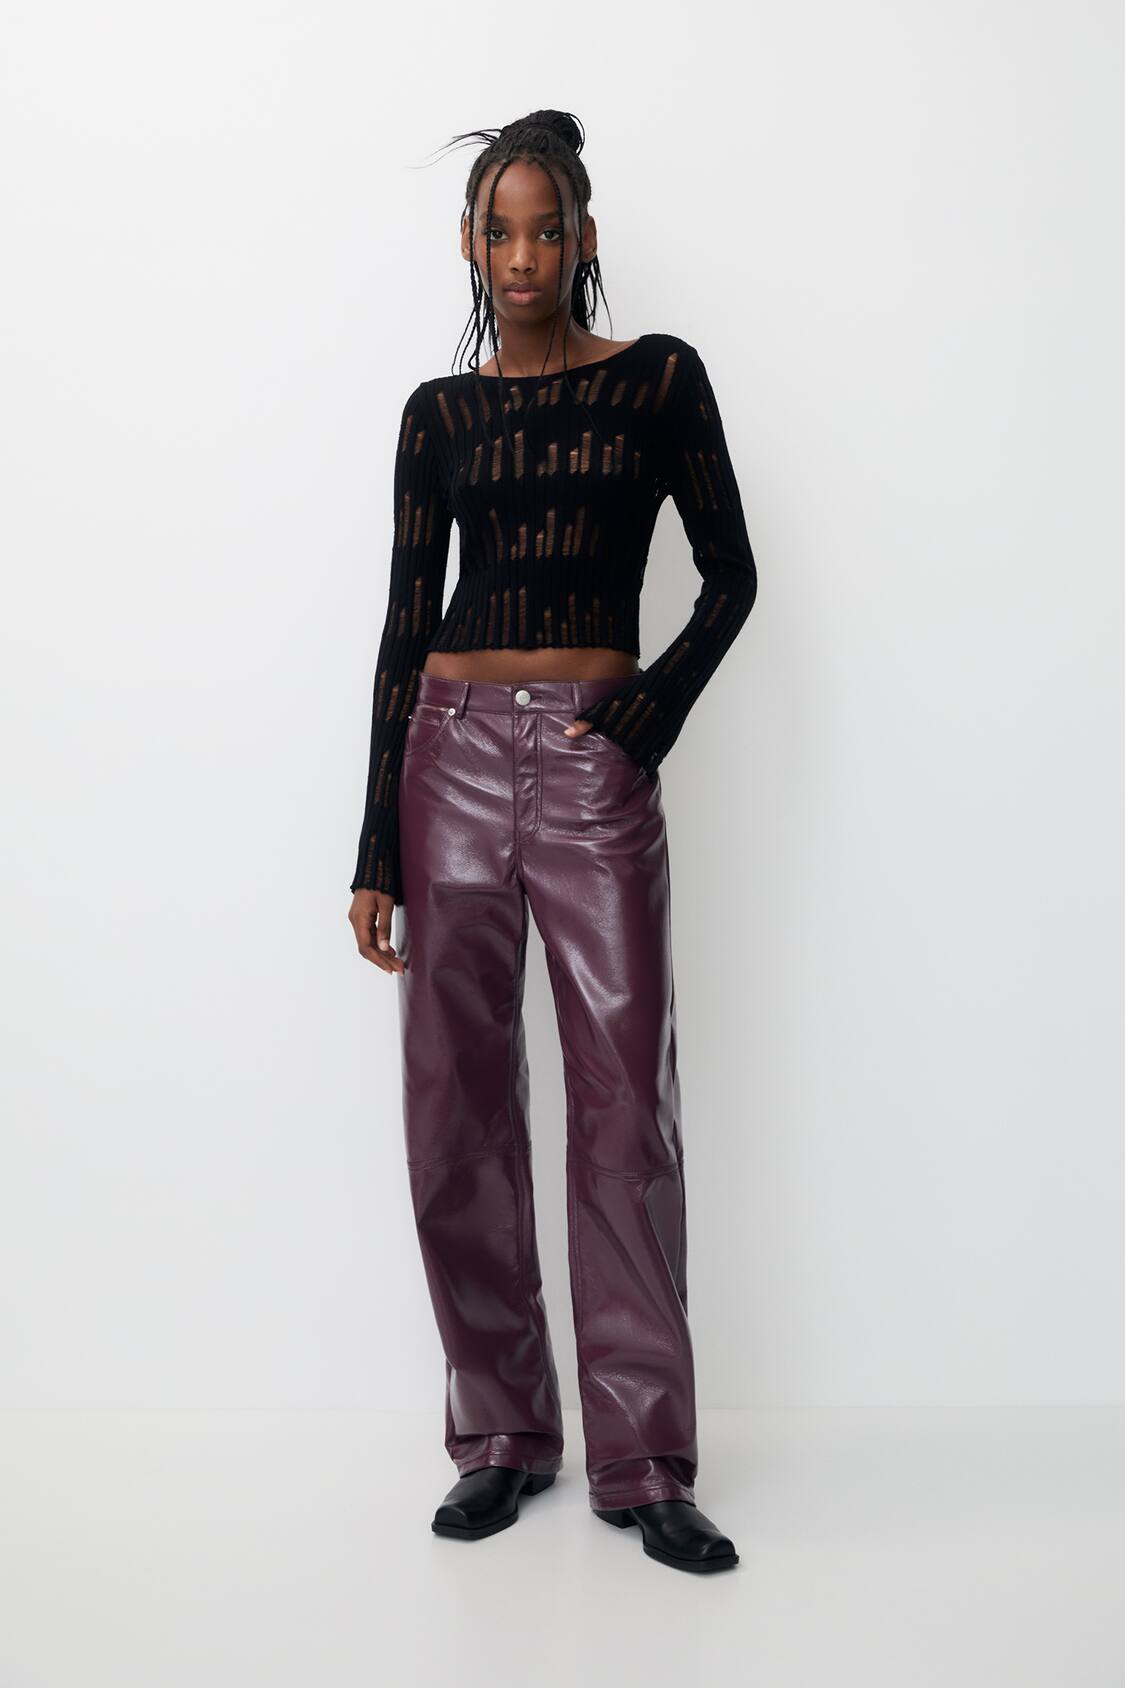 Straight fit faux leather trousers